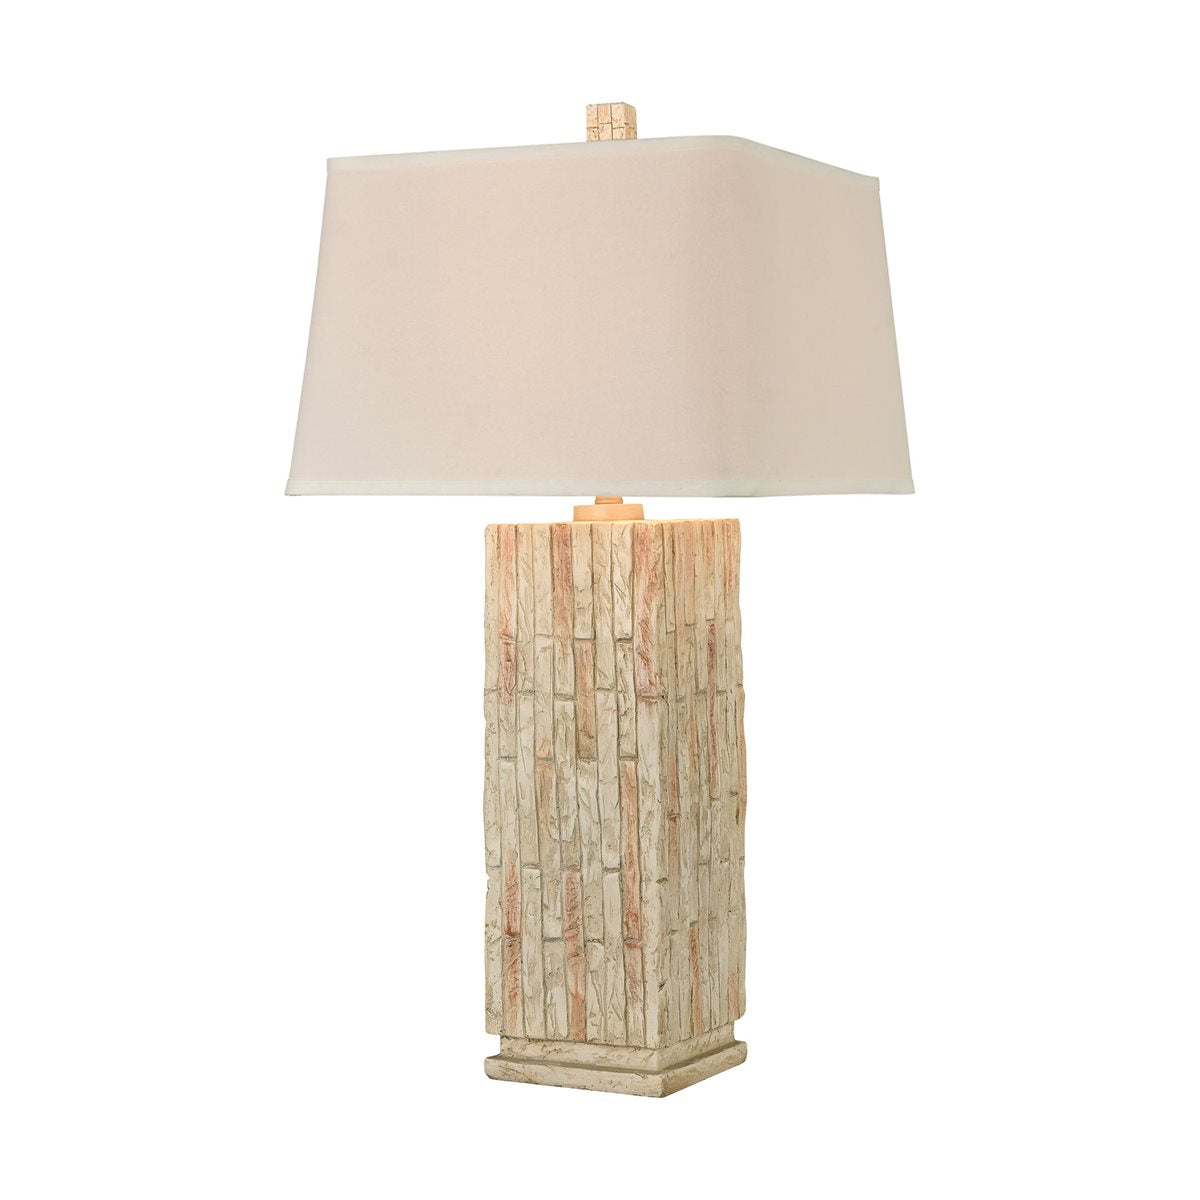 Stein World Chaseholme Table Lamp 77207